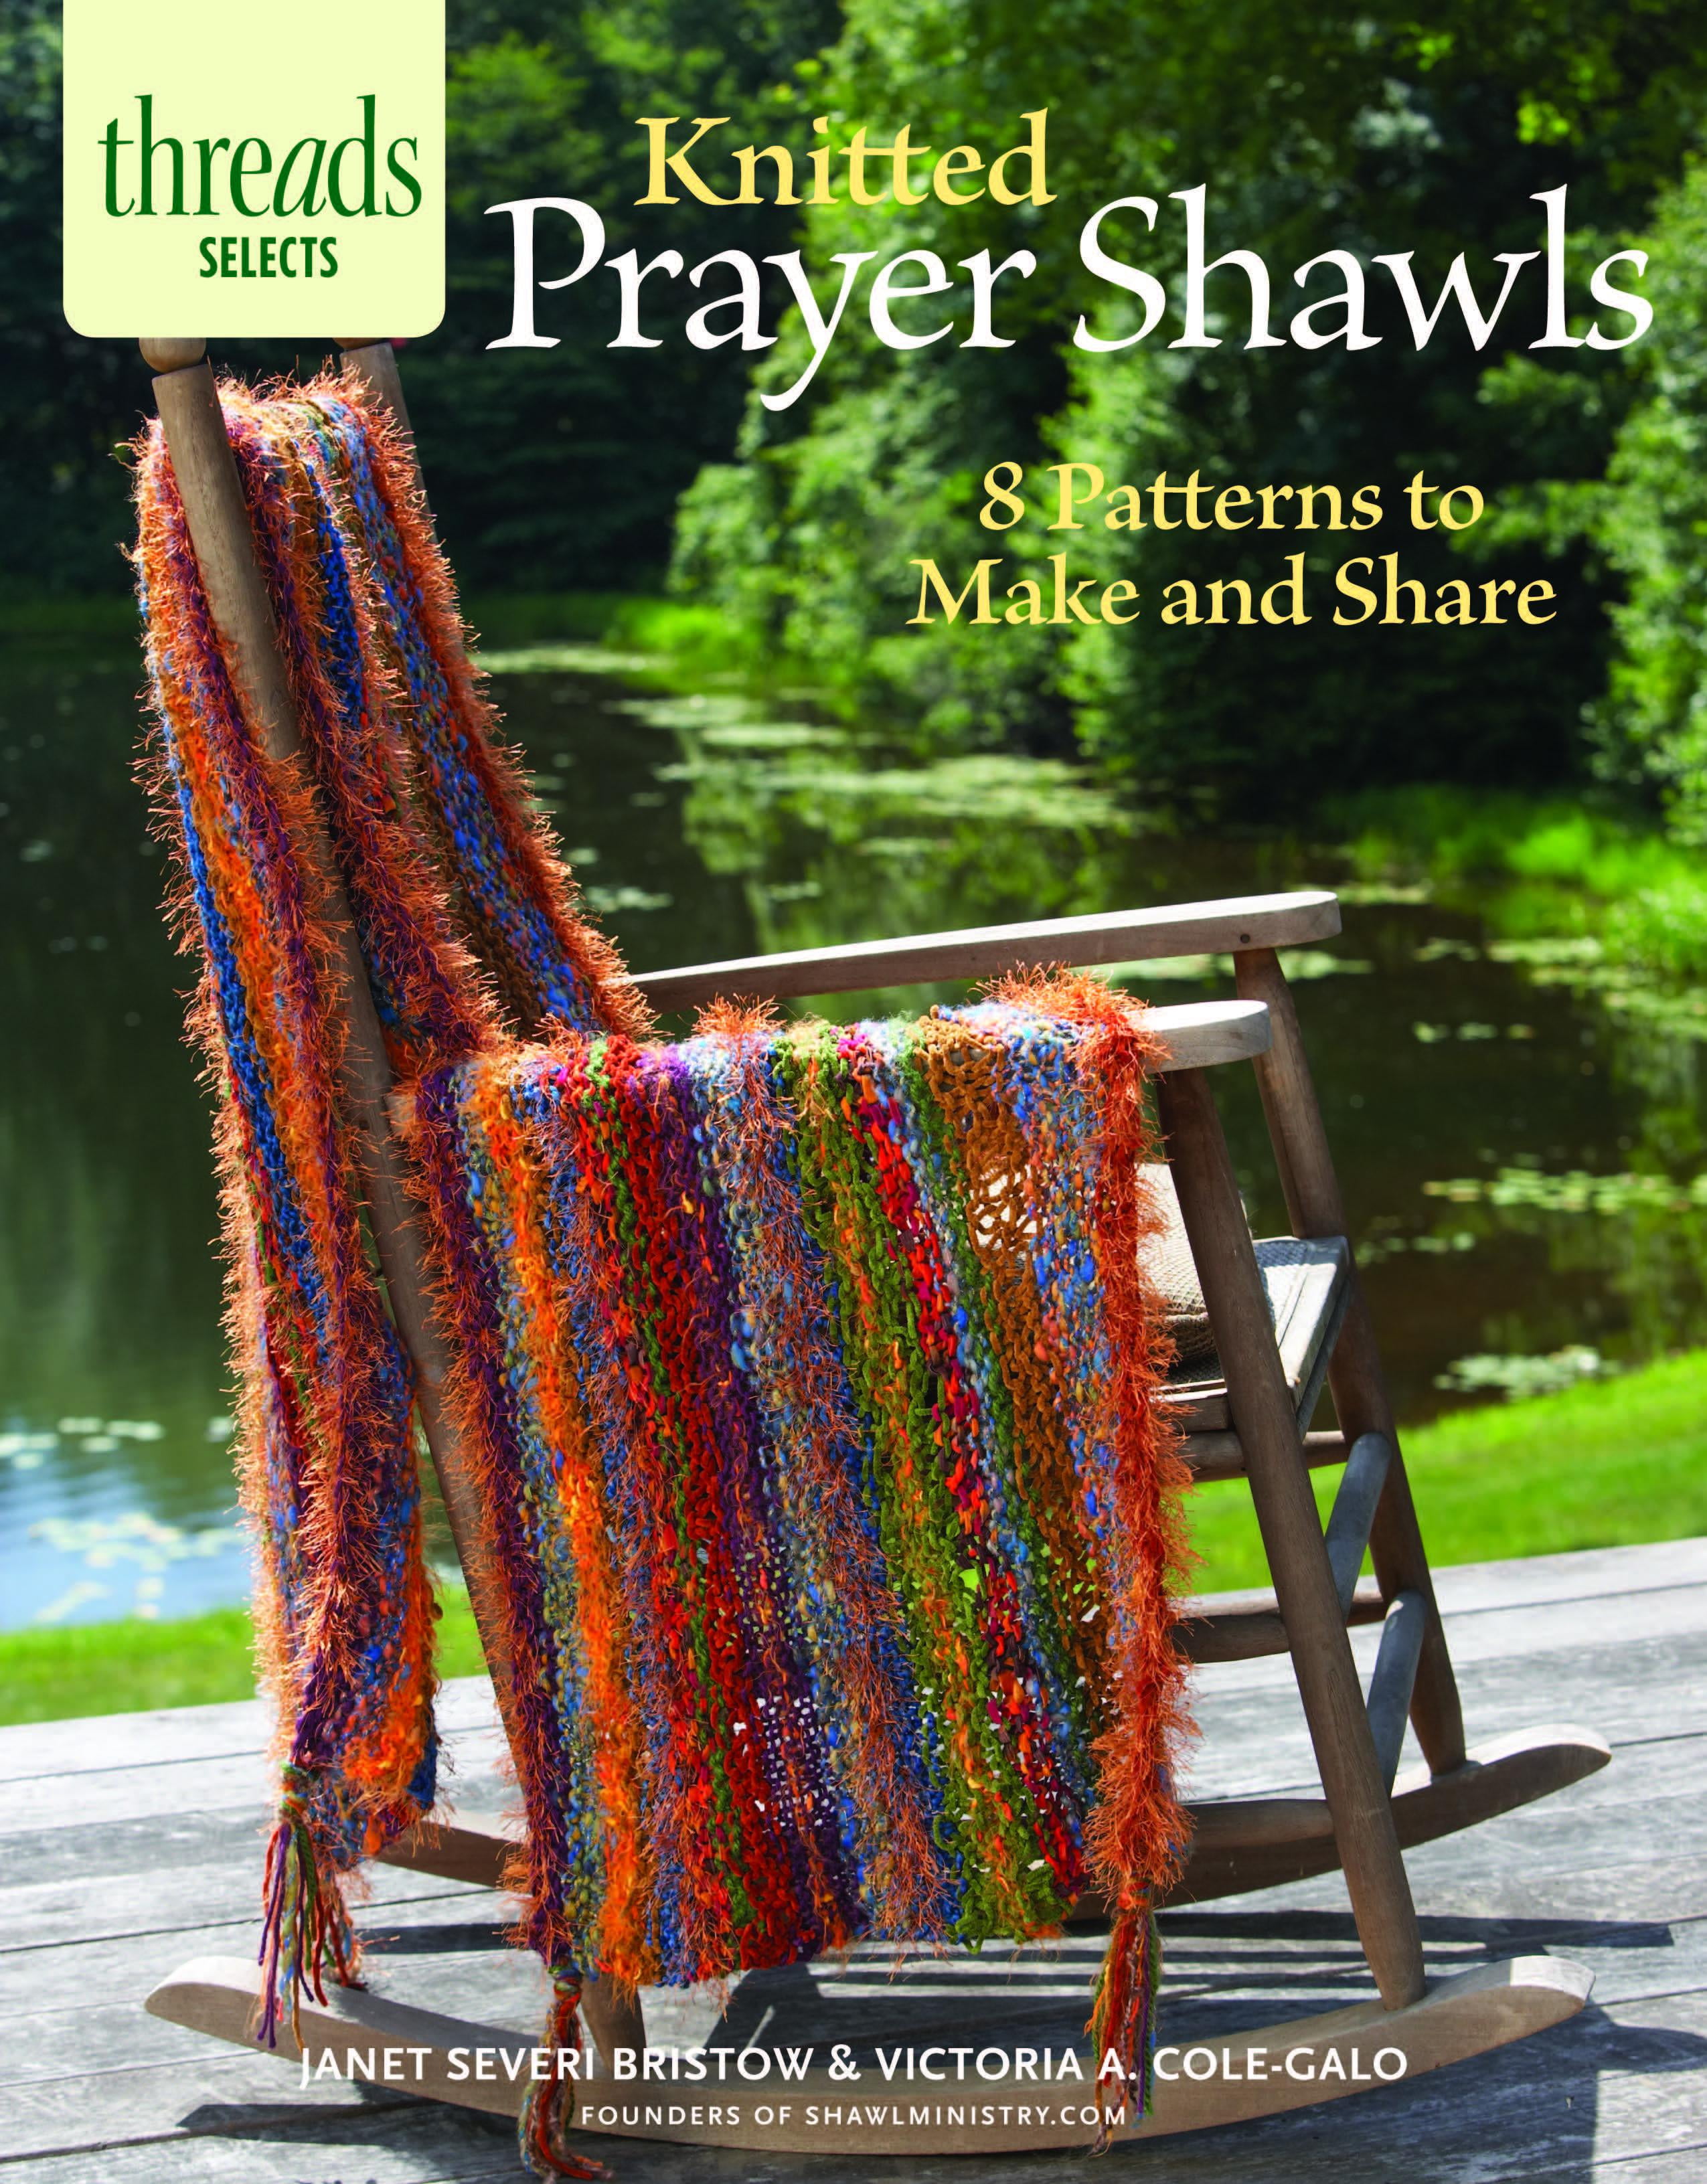 Threads Selects Knitted Prayer Shawls 8 Patterns to